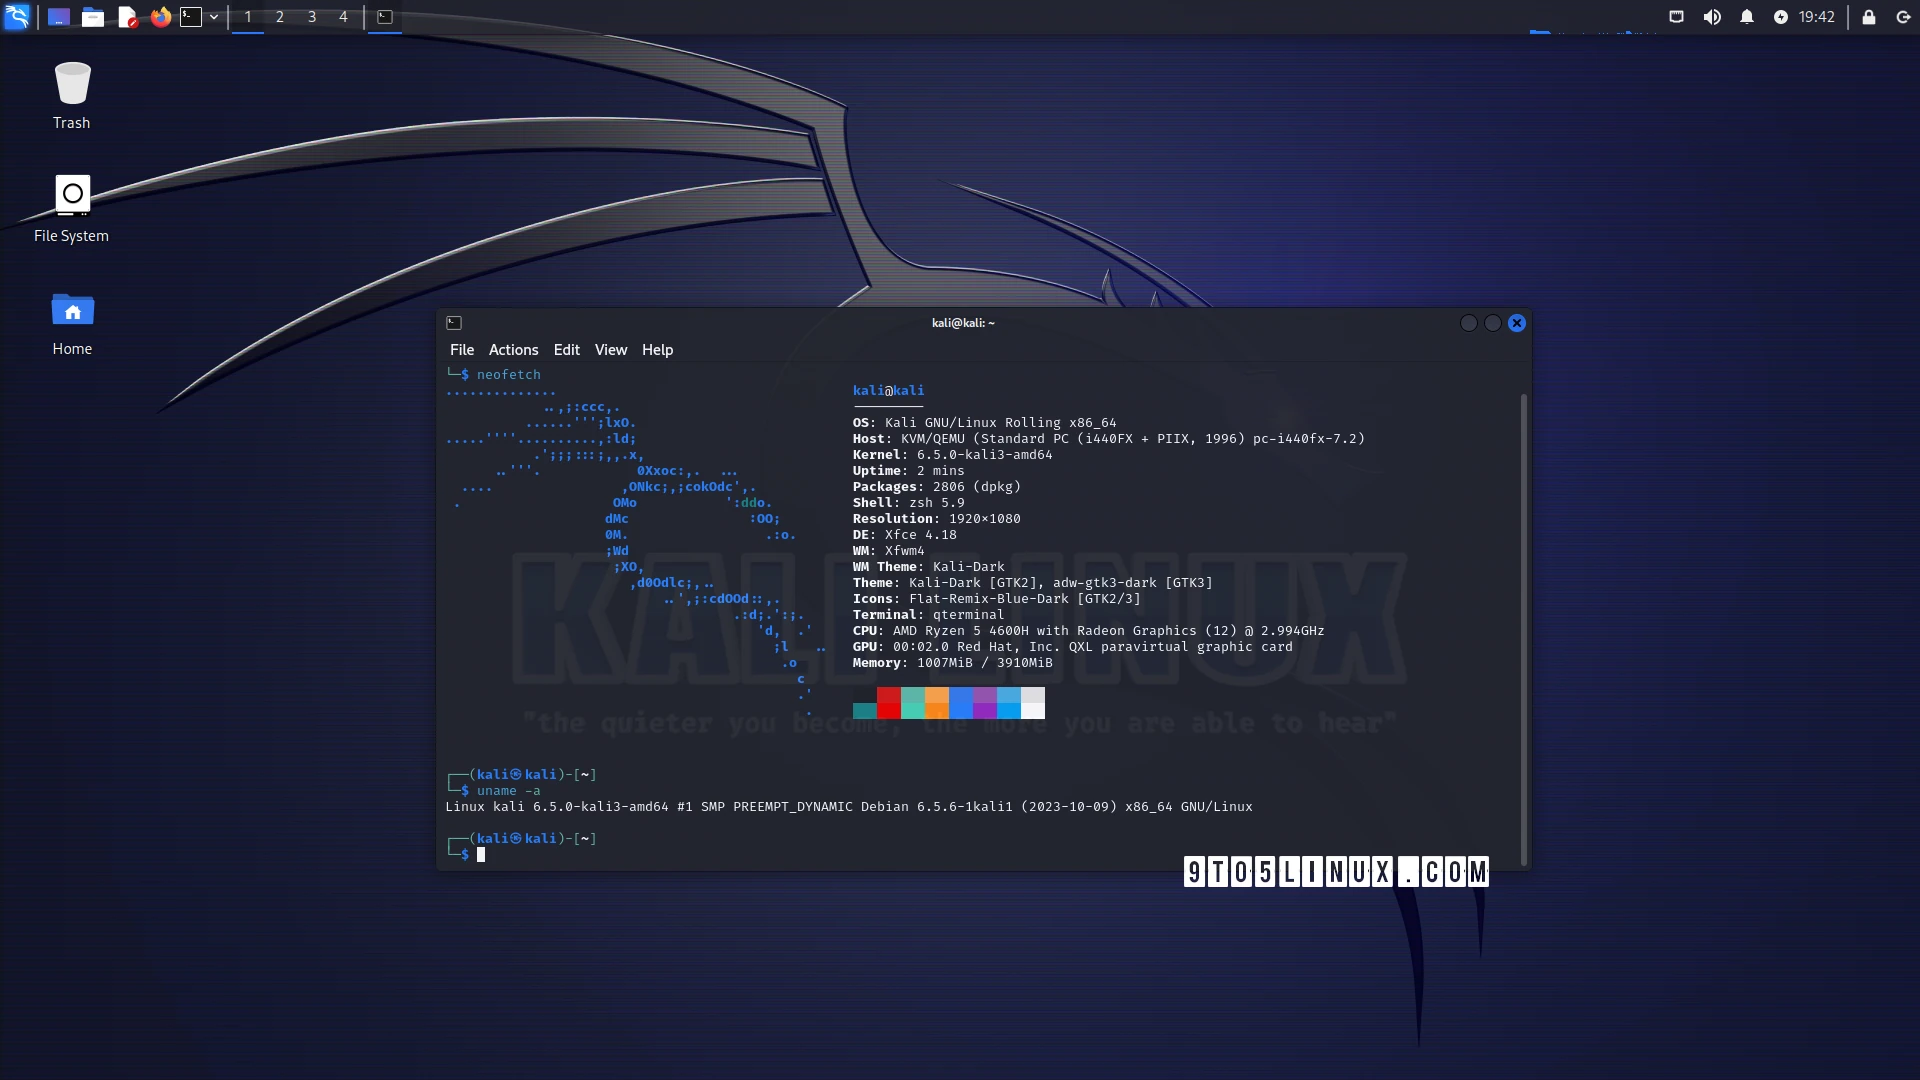 Ethical Hacking Distro Kali Linux 2023.4 Brings Support for Raspberry Pi 5